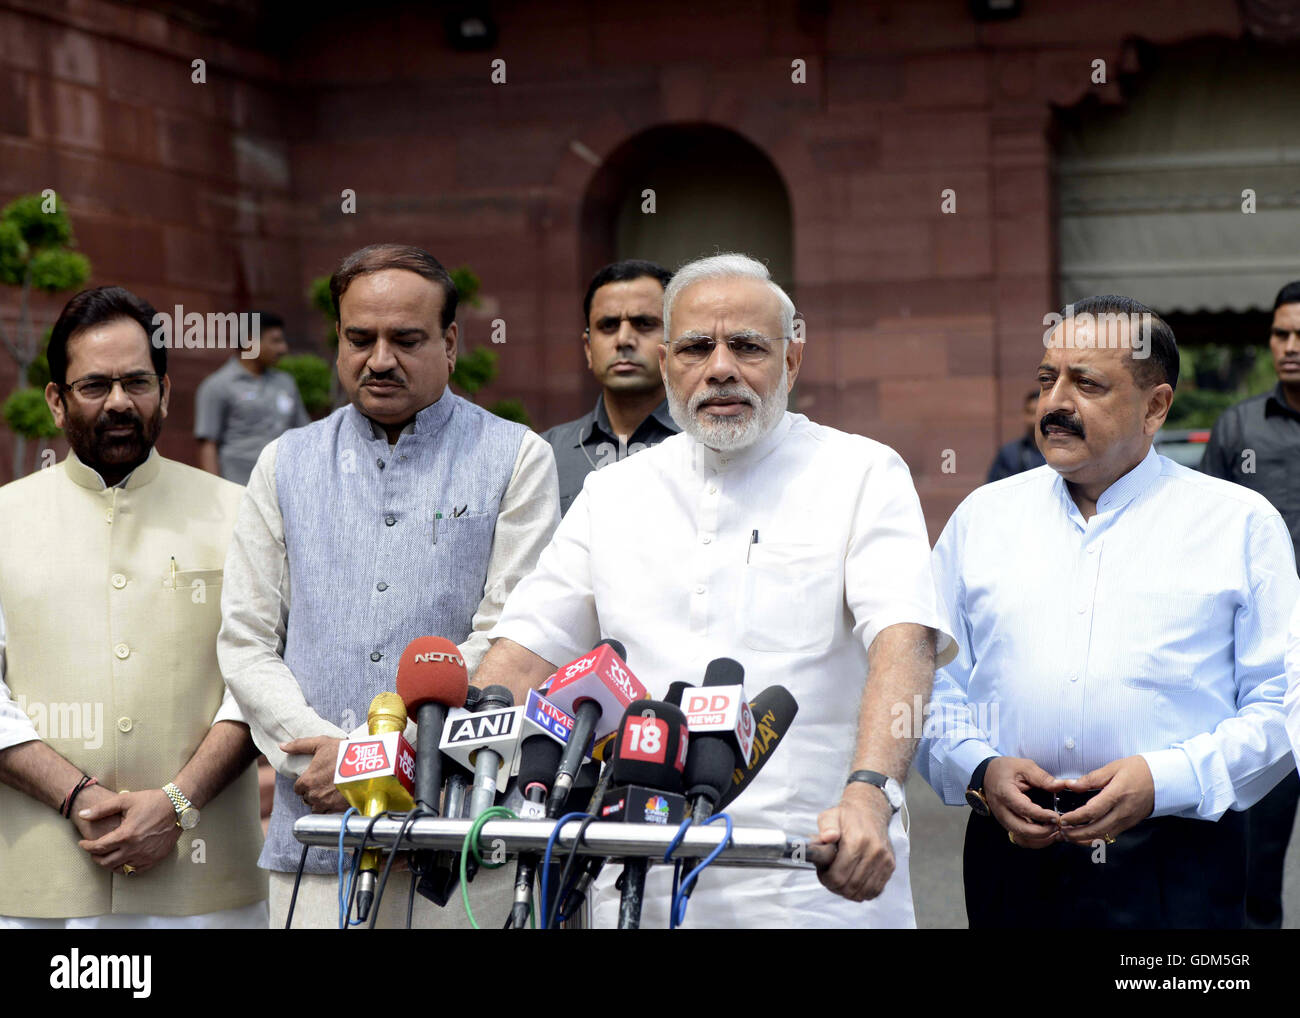 (160718) -- NEW DELHI, July 18, 2016 (Xinhua) -- Indian Prime Minister Narendra Modi (2nd R, front) addresses the media at Parliament House upon arrival on the first day of monsoon session in New Delhi, India, July 18, 2016. The monsoon session of Indian lower house began on Monday but was adjourned shortly toTuesday due to the death of Madhya Pradesh MP Dalpat Singh Paraste. (Xinhua/Stringer) (sxk) Stock Photo